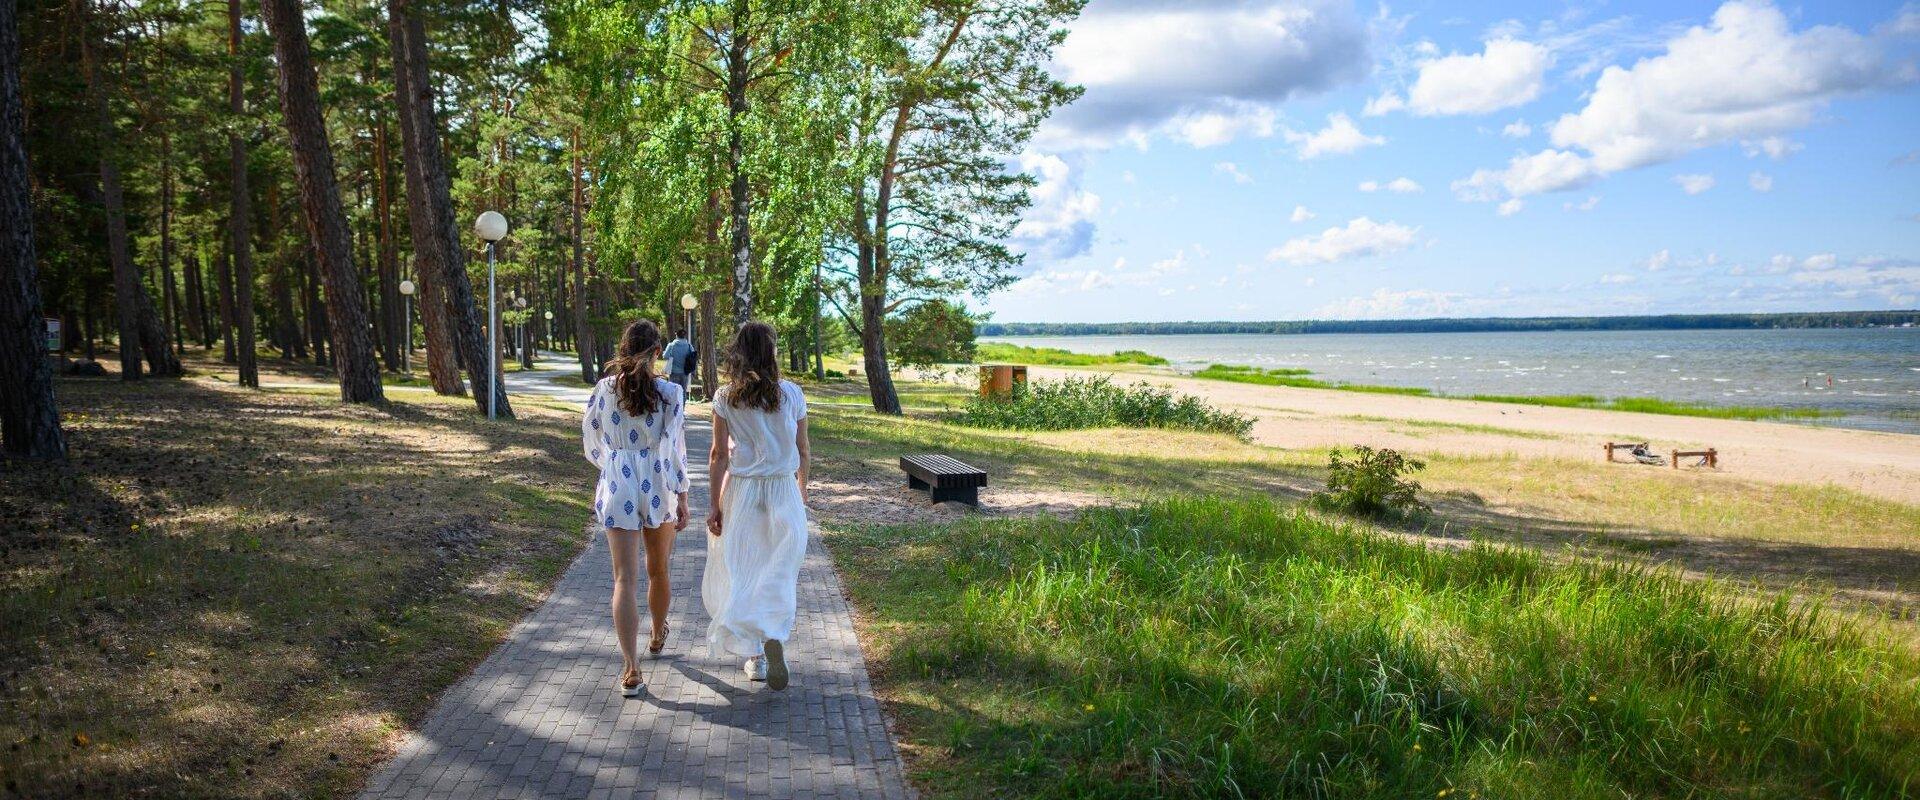 Võsu, in Lahemaa National Park, is home to one of the most popular sandy beaches among holidaymakers in the region. The beach has its own lifeguards, 